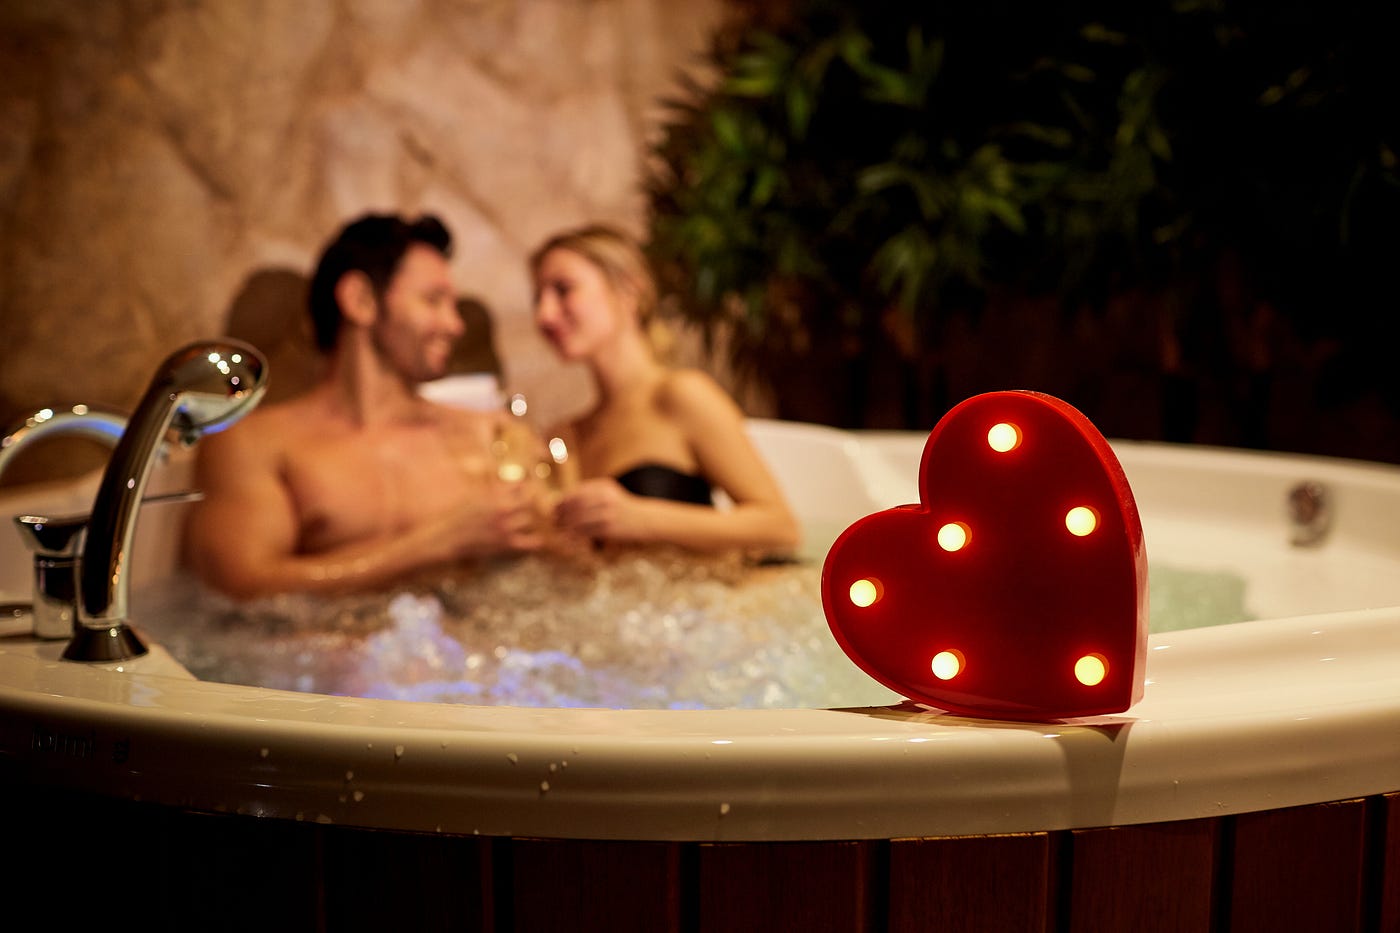 Enjoying Hot Tub Sex for the First Time by Holly Bradshaw Sexual Tendencies Medium pic photo